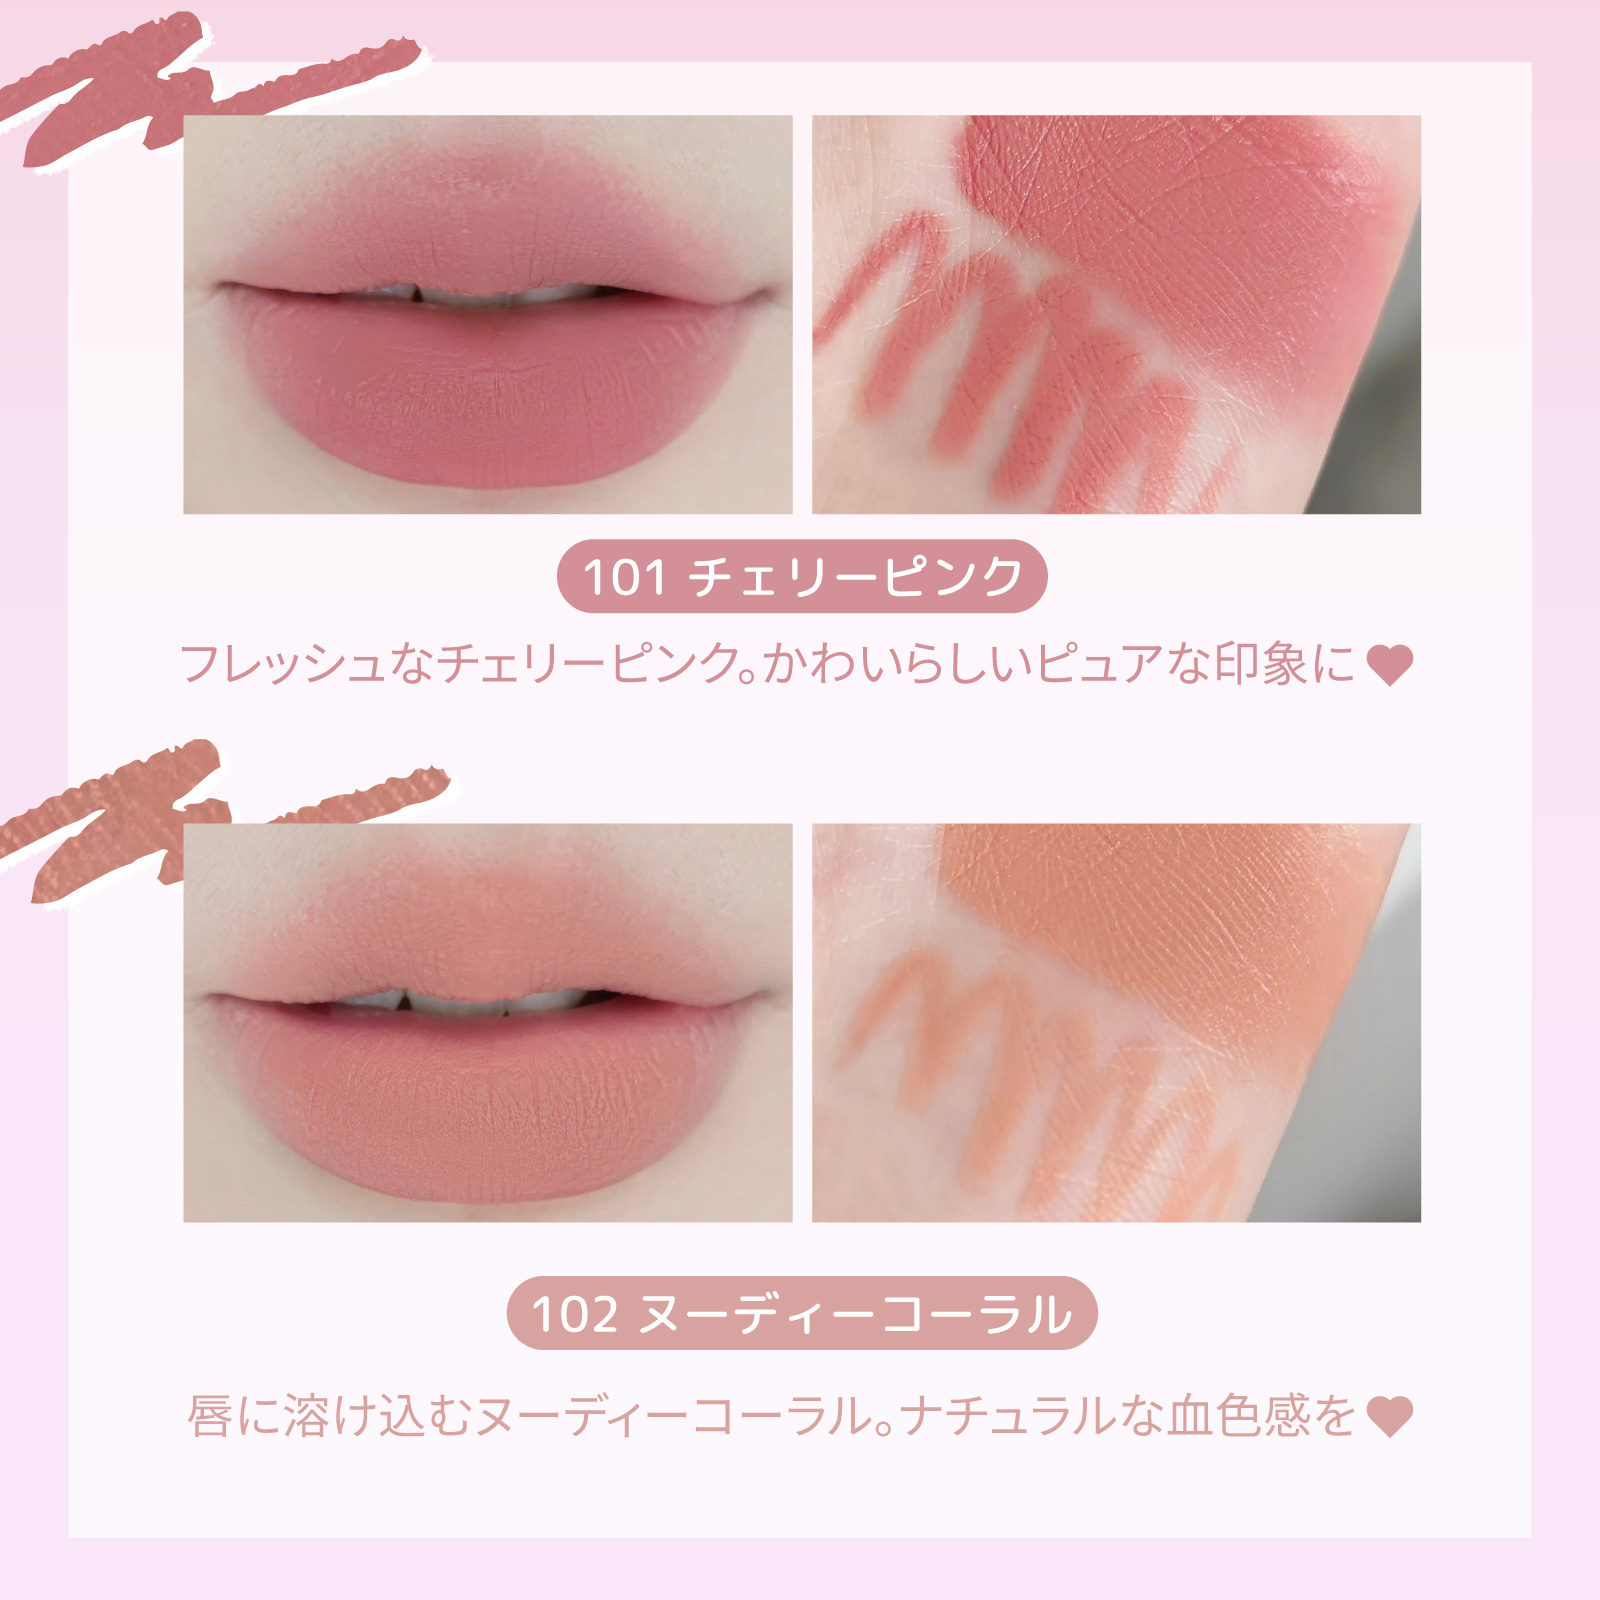 [ official ] Jill Lee n the smallest laughing . lip pen sill (105 pink Brown ) lip liner lip make-up the smallest laughing .. angle UP jill leen.